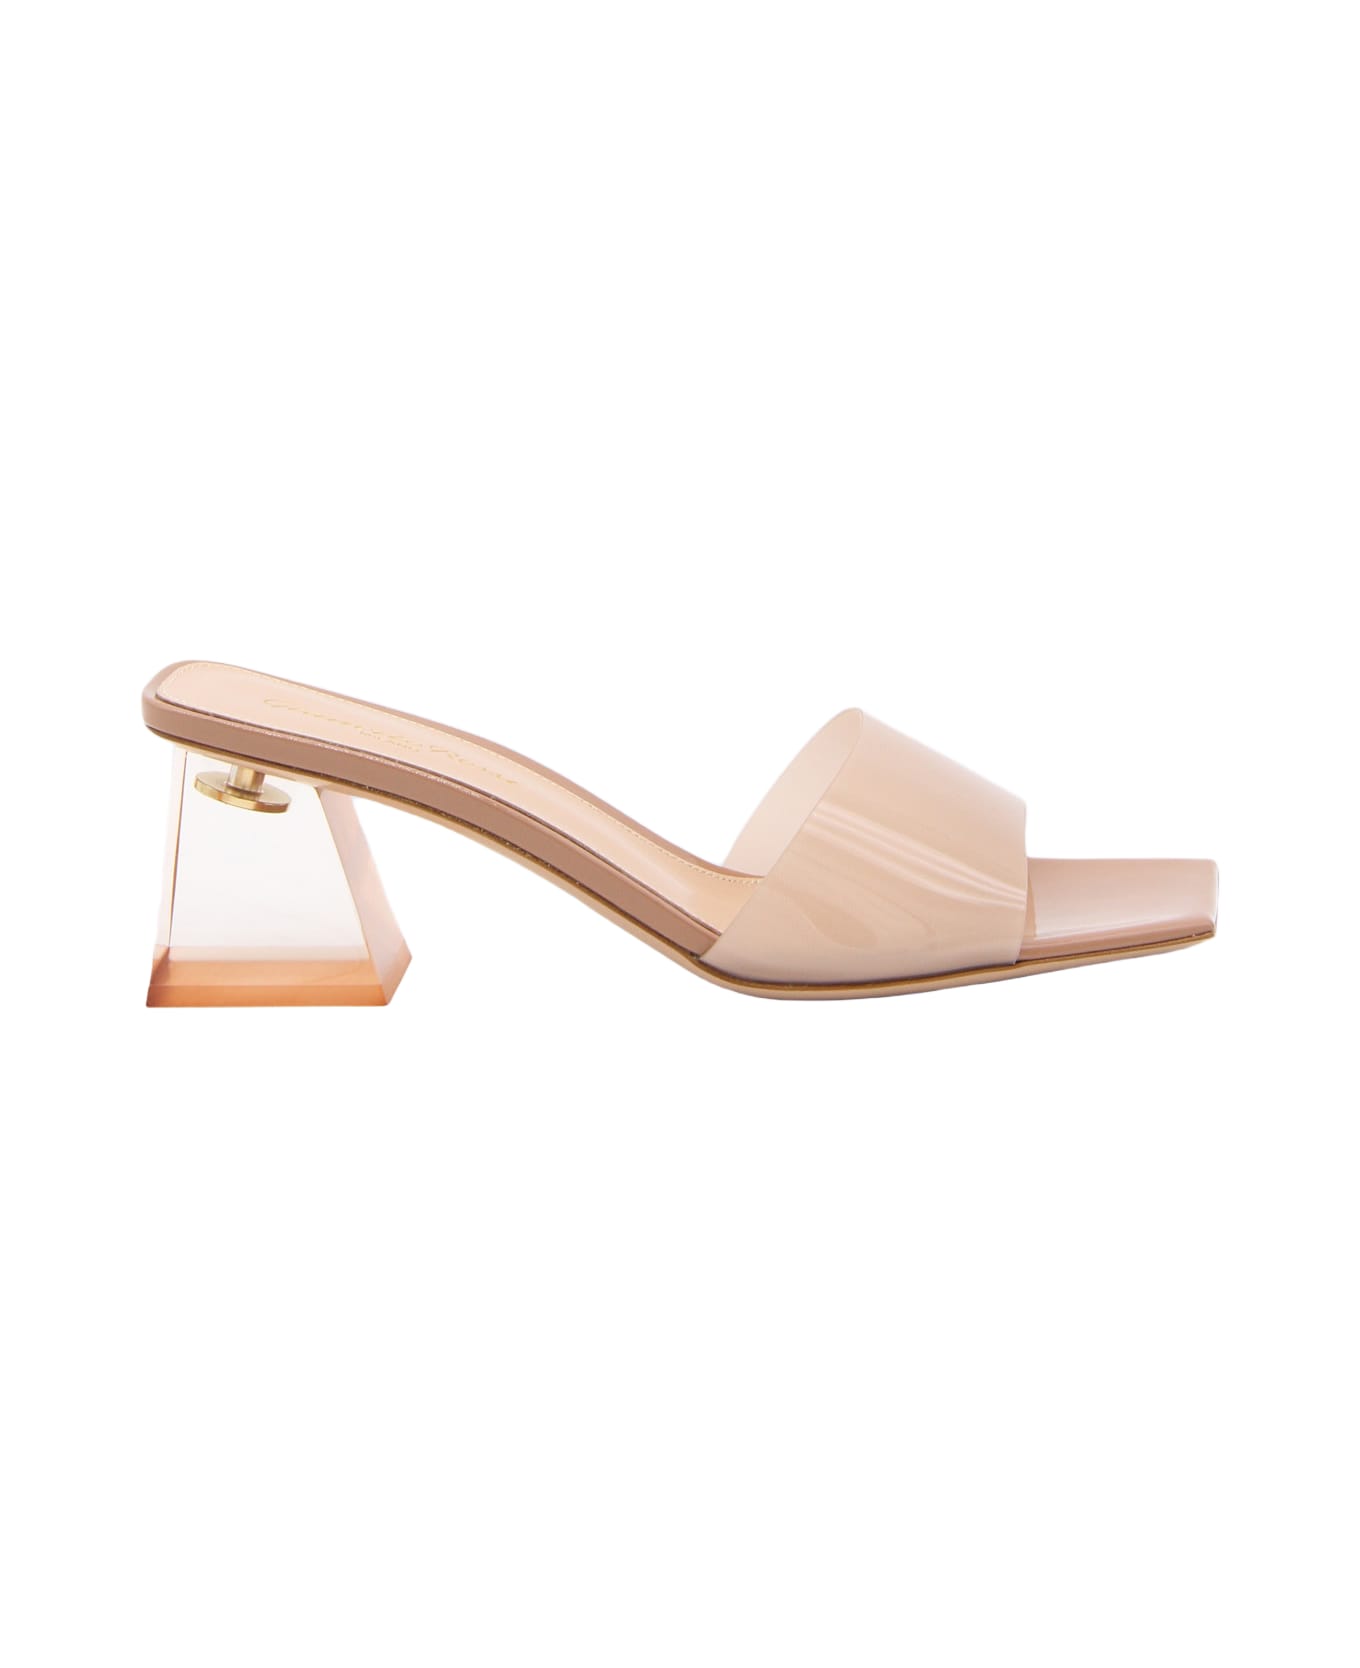 Gianvito Rossi Beige Pvc And Leather Cosmic Sandals - PRALINE サンダル